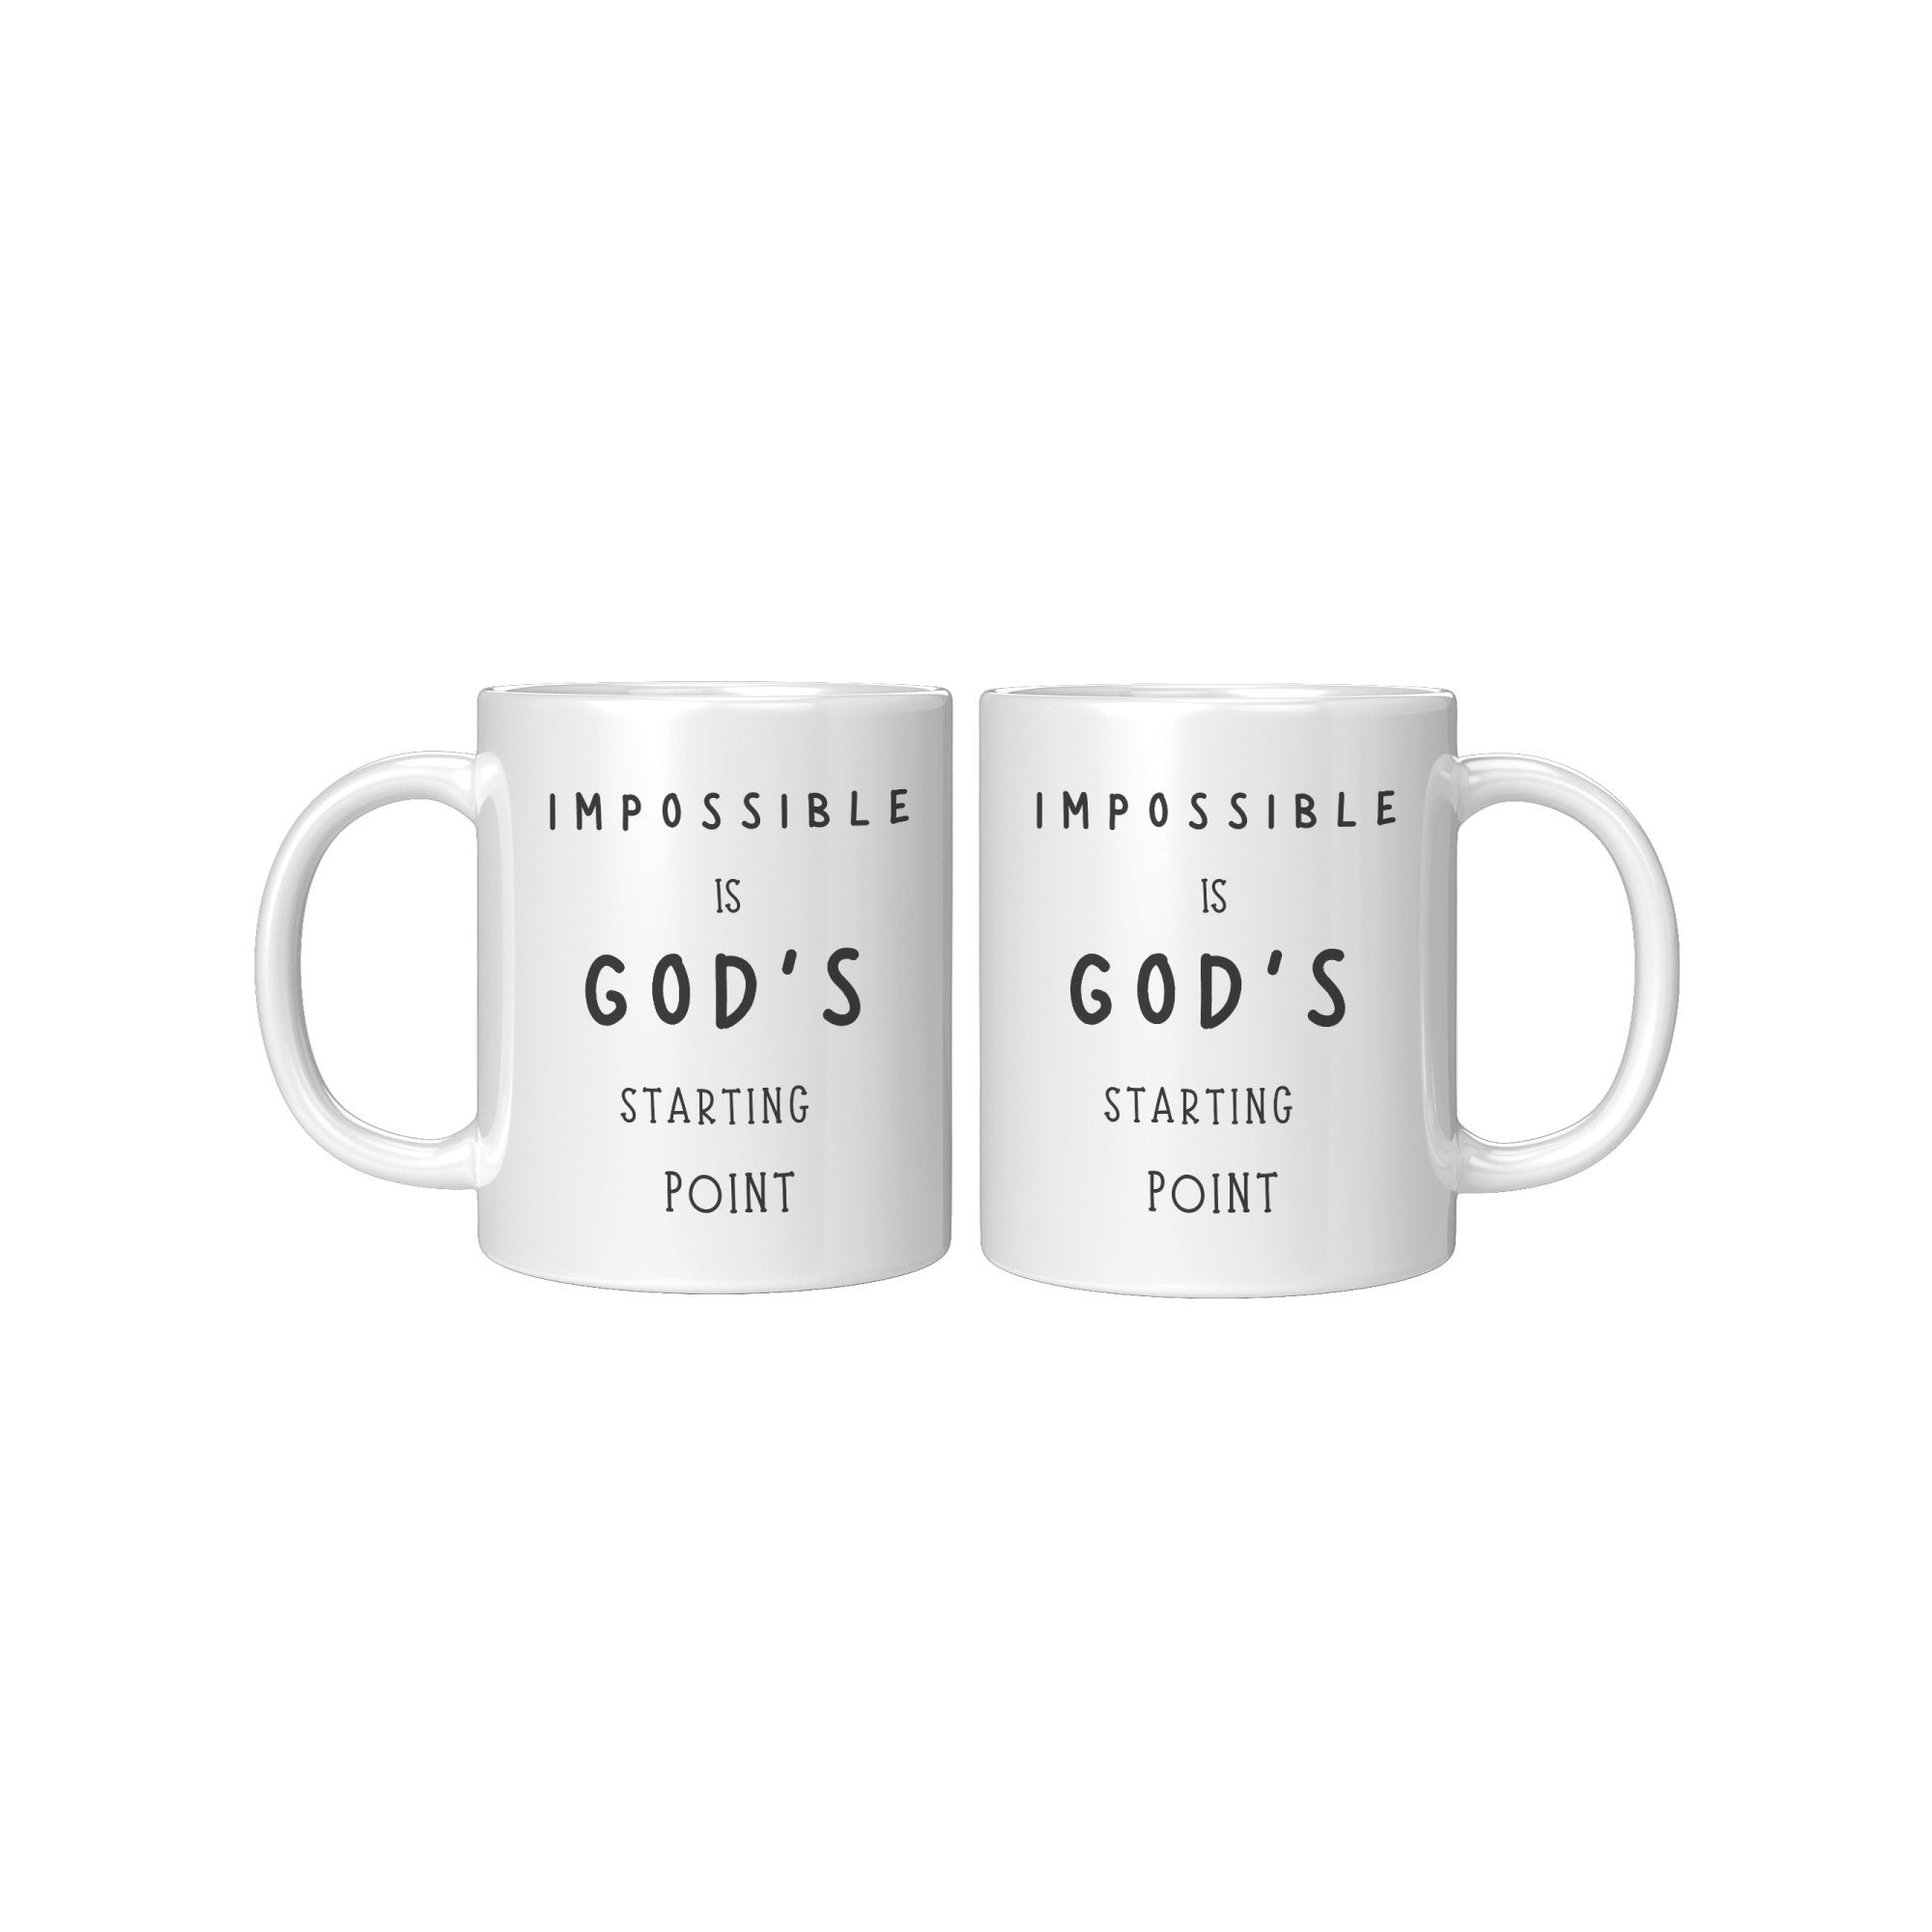 Impossible Is God's Starting Point Mug - 12 Units - Bulk Discount